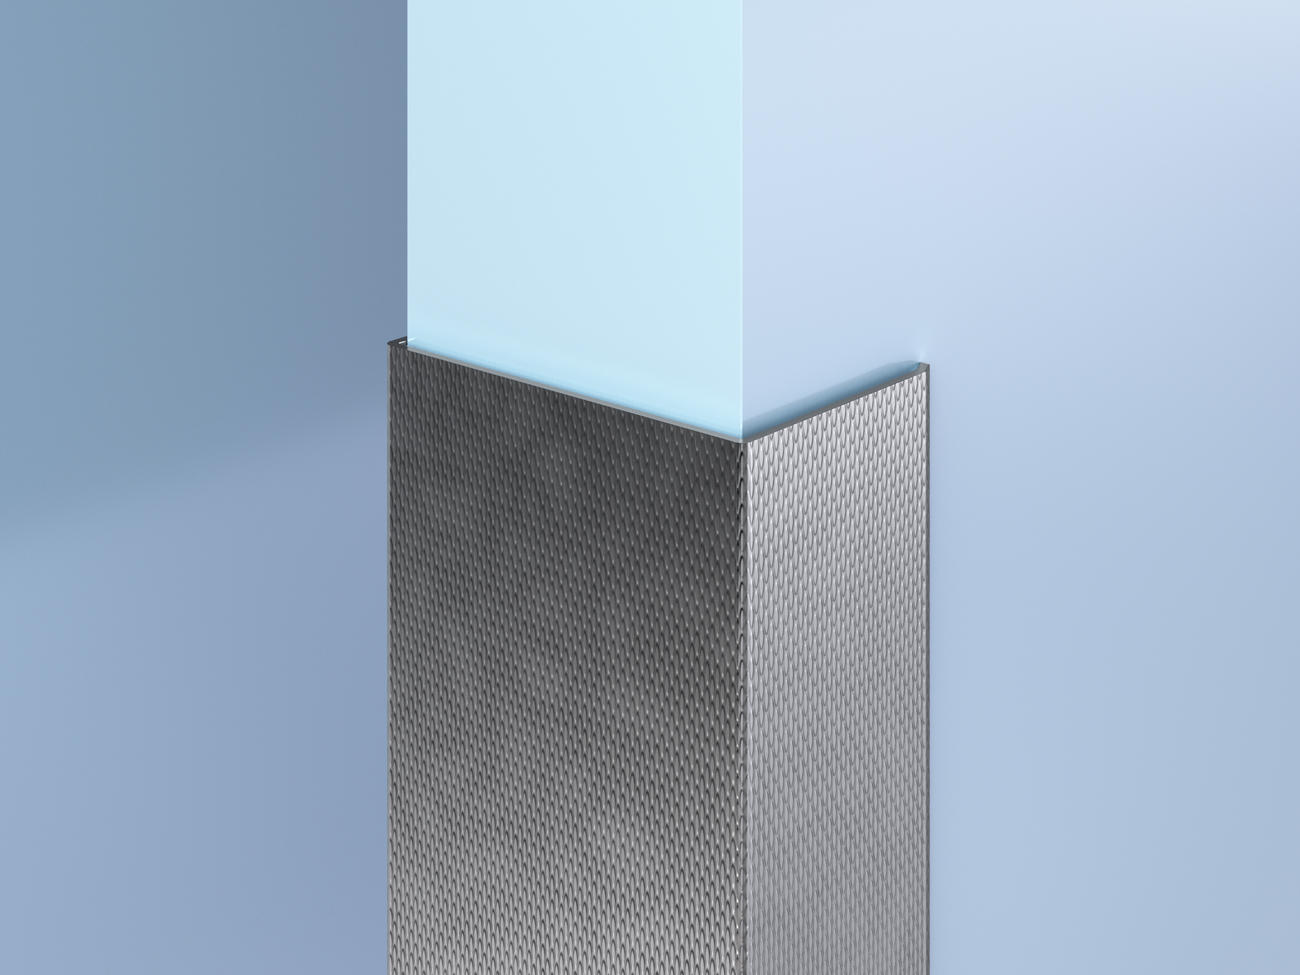 STAINLESS STEEL CORNER GUARDS - Fabform